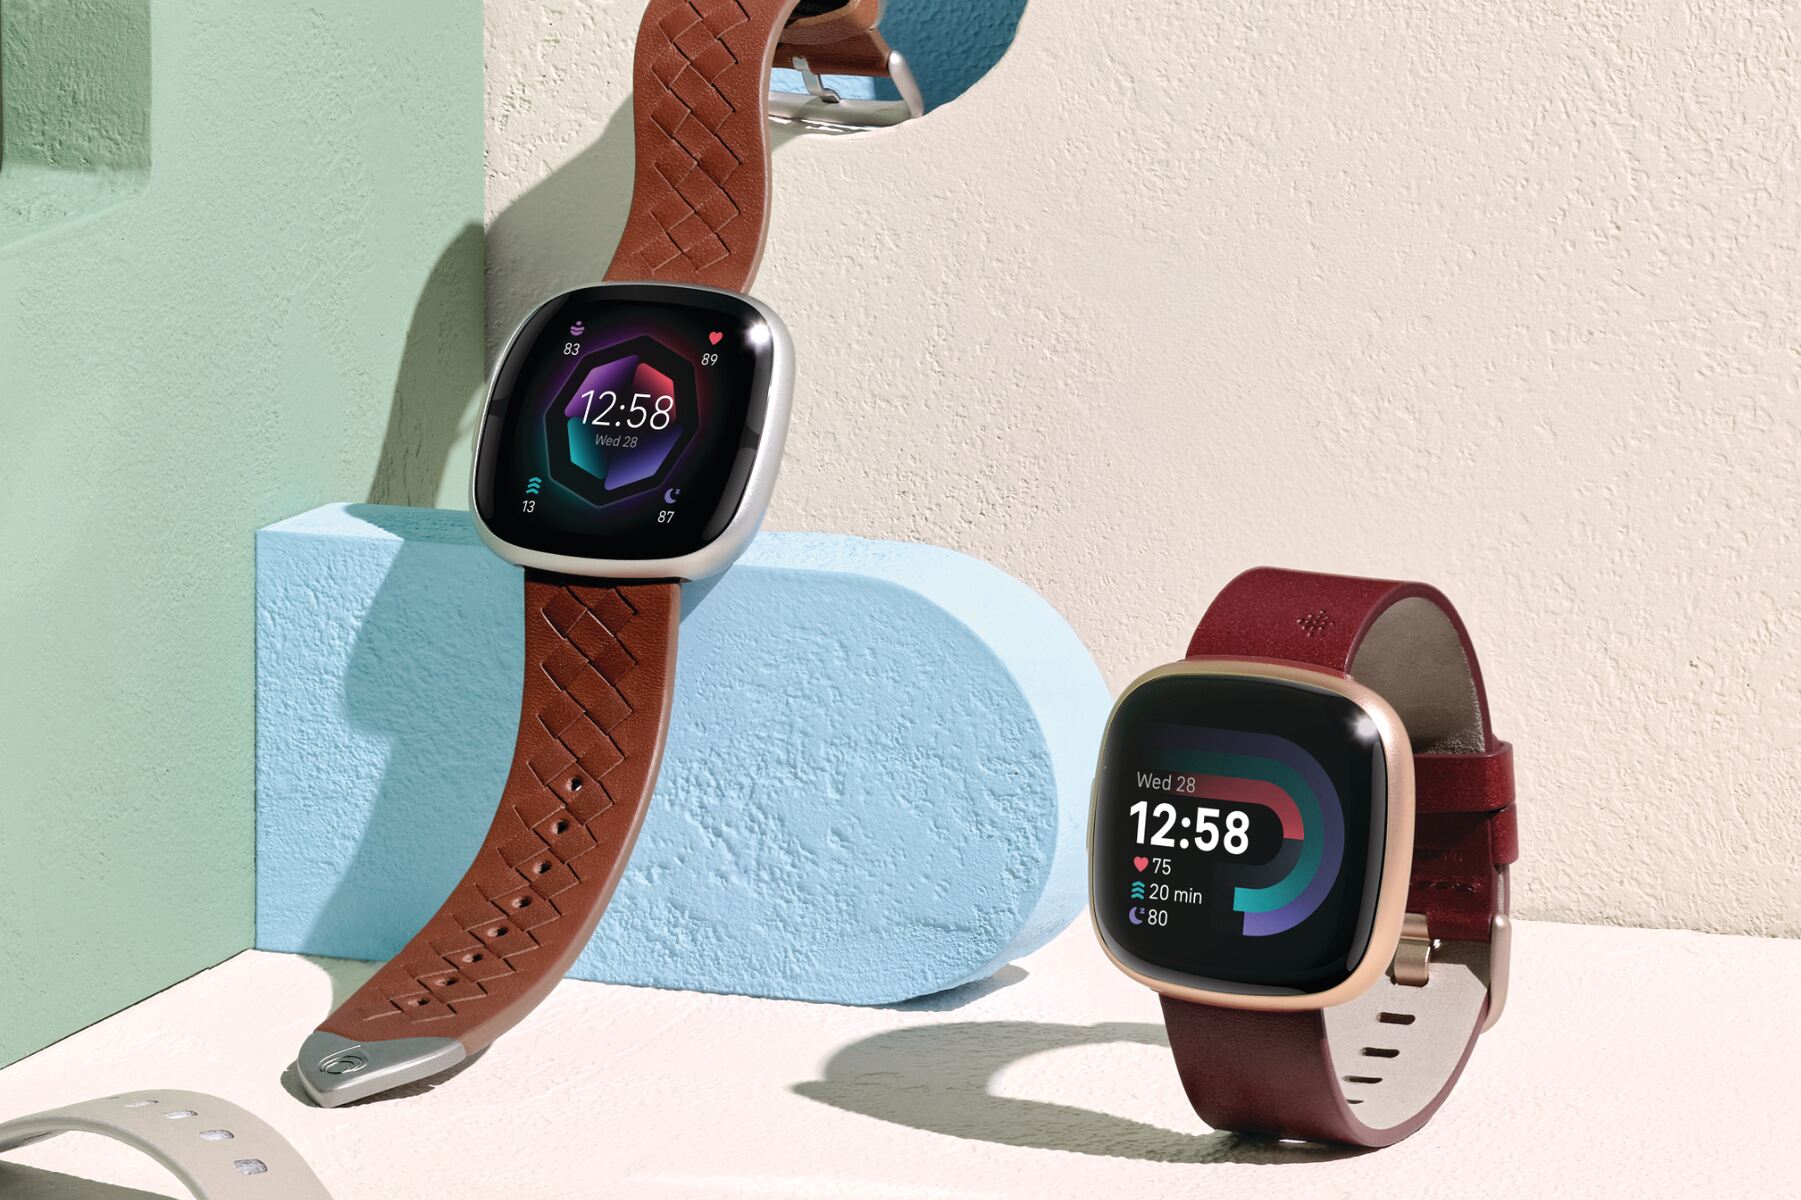 Sense 2 Vs. Versa 4: Comparing Features To Determine The Better Fitbit